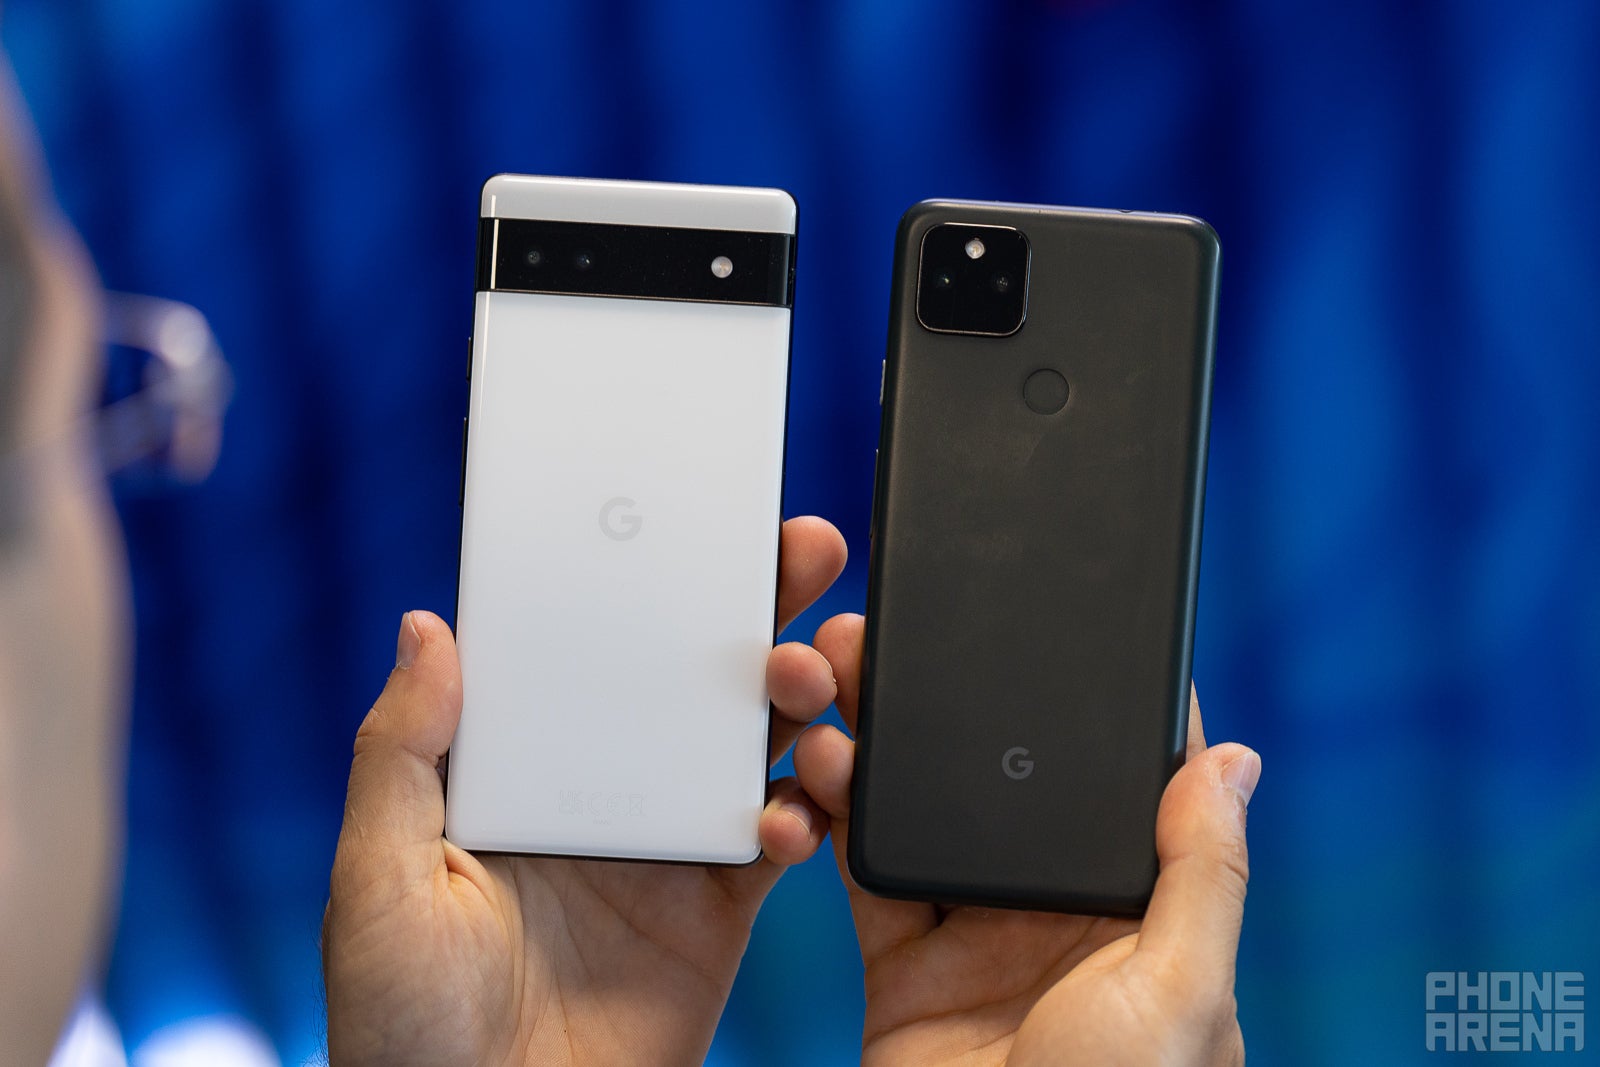 The Pixel 6a (left) and Pixel 5a (right) - Google Pixel 6a vs Pixel 5a comparison: Twice the performance!